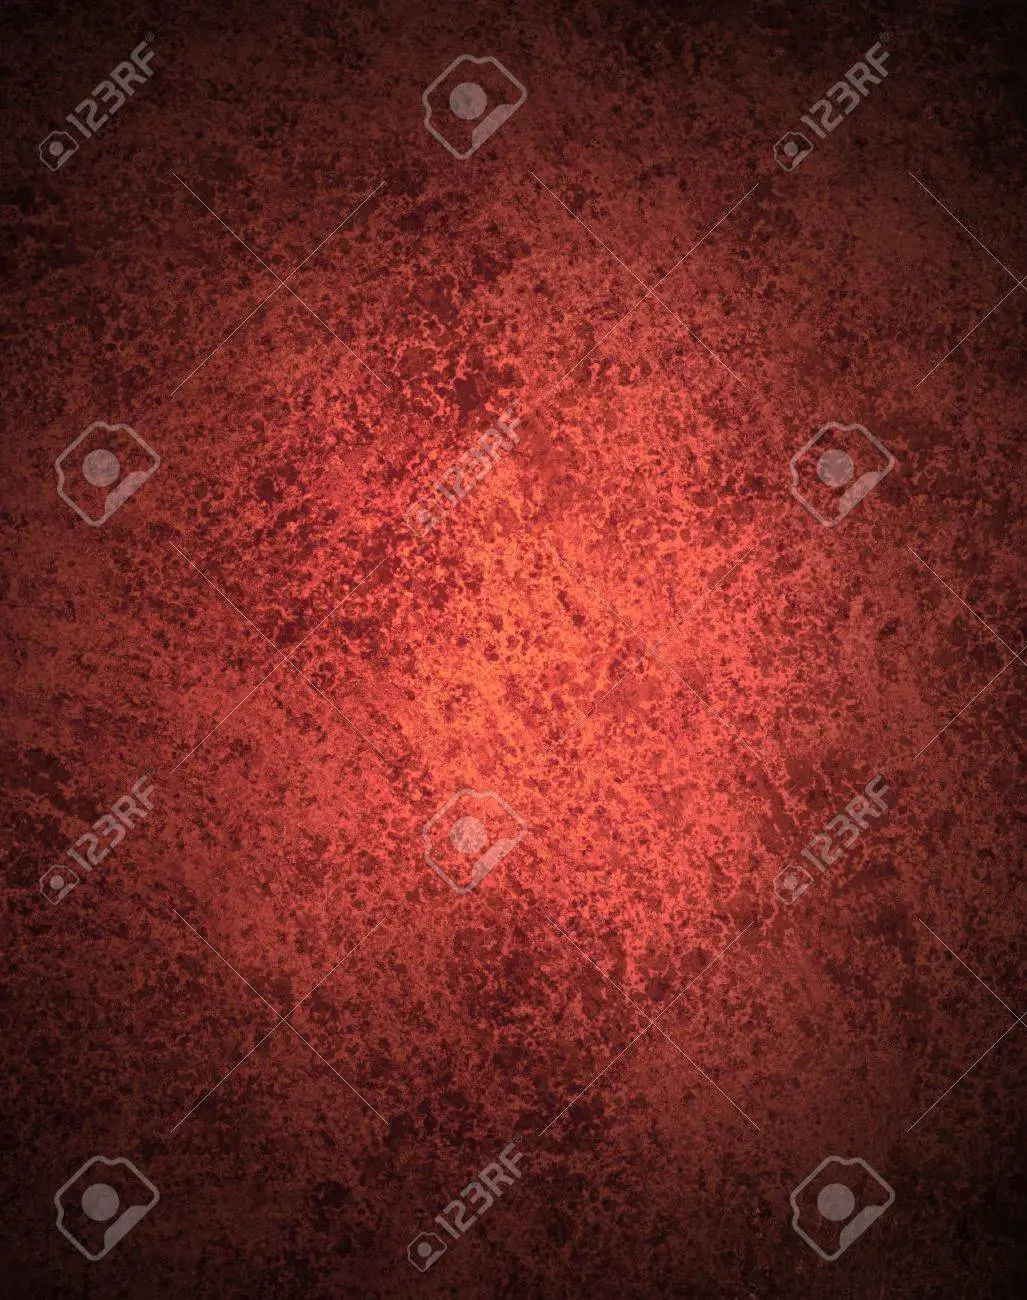 Stock Photo - abstract red